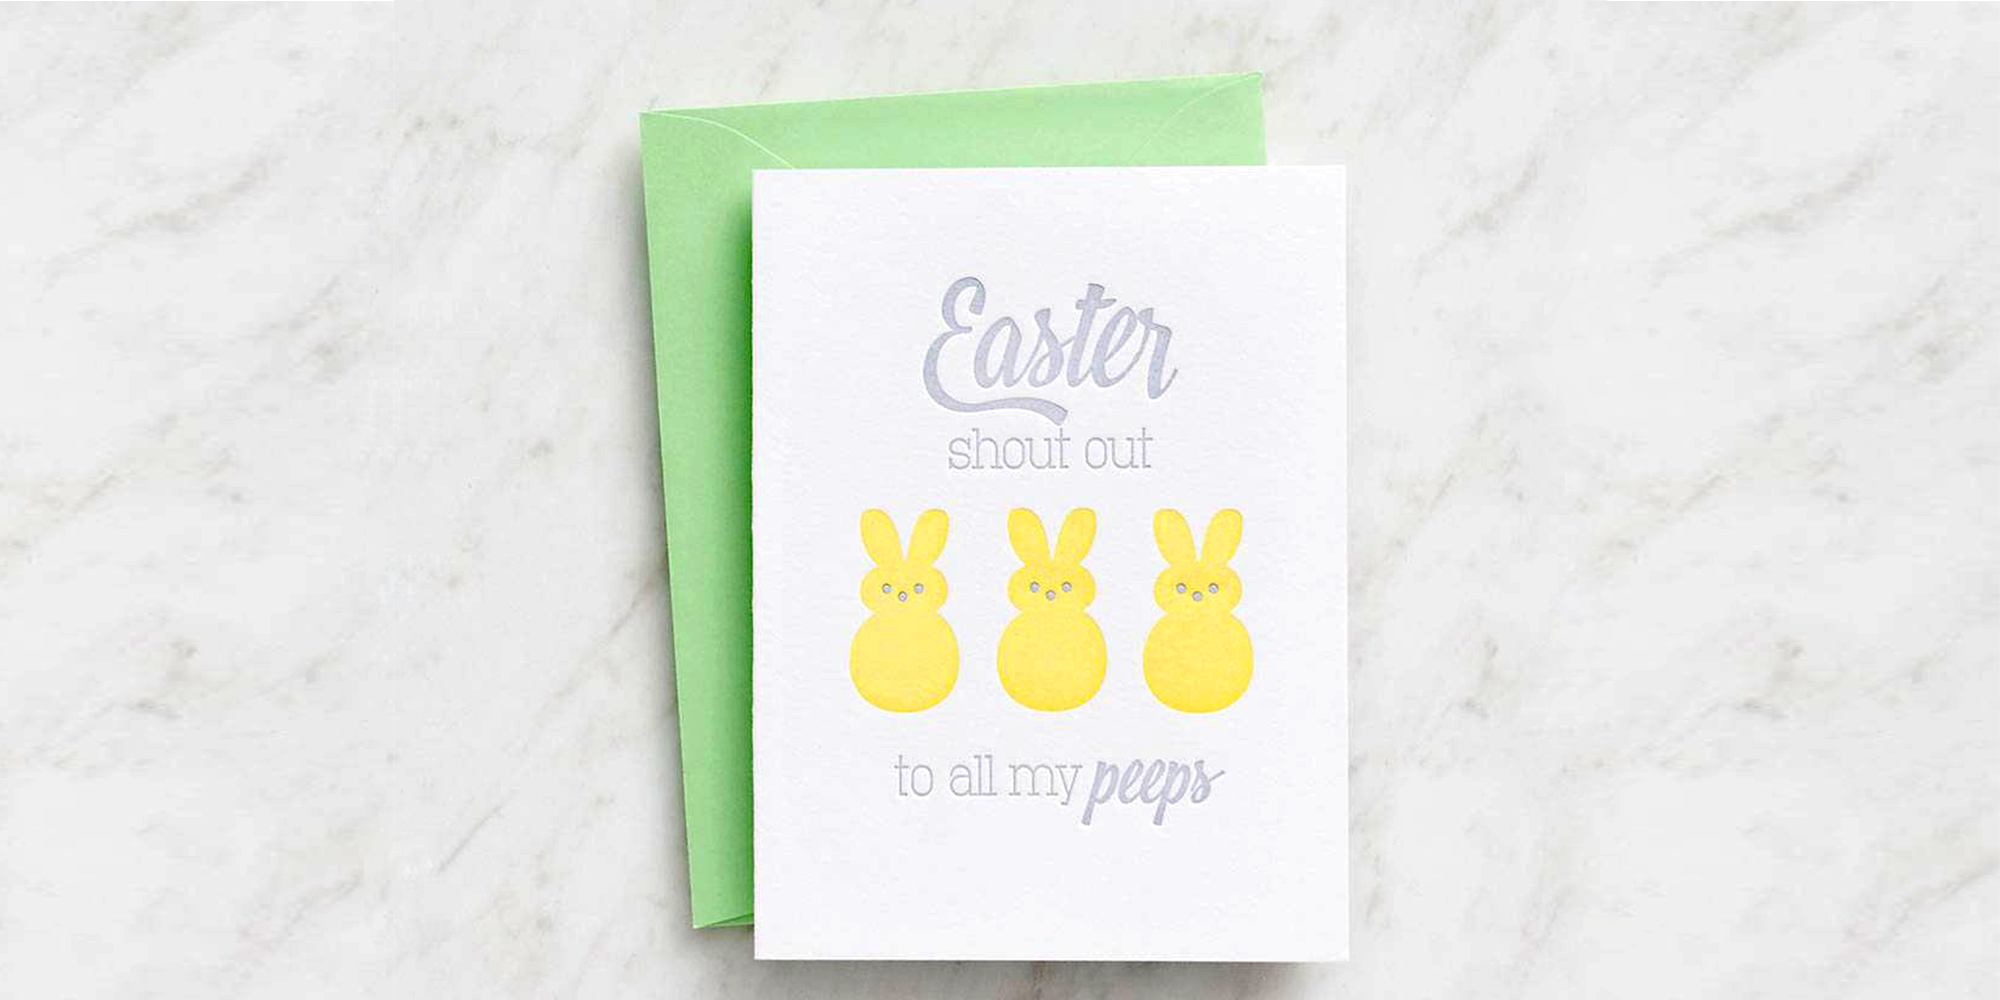 18 Best Easter Card Ideas 2021 - Funny Easter Cards To Buy Online